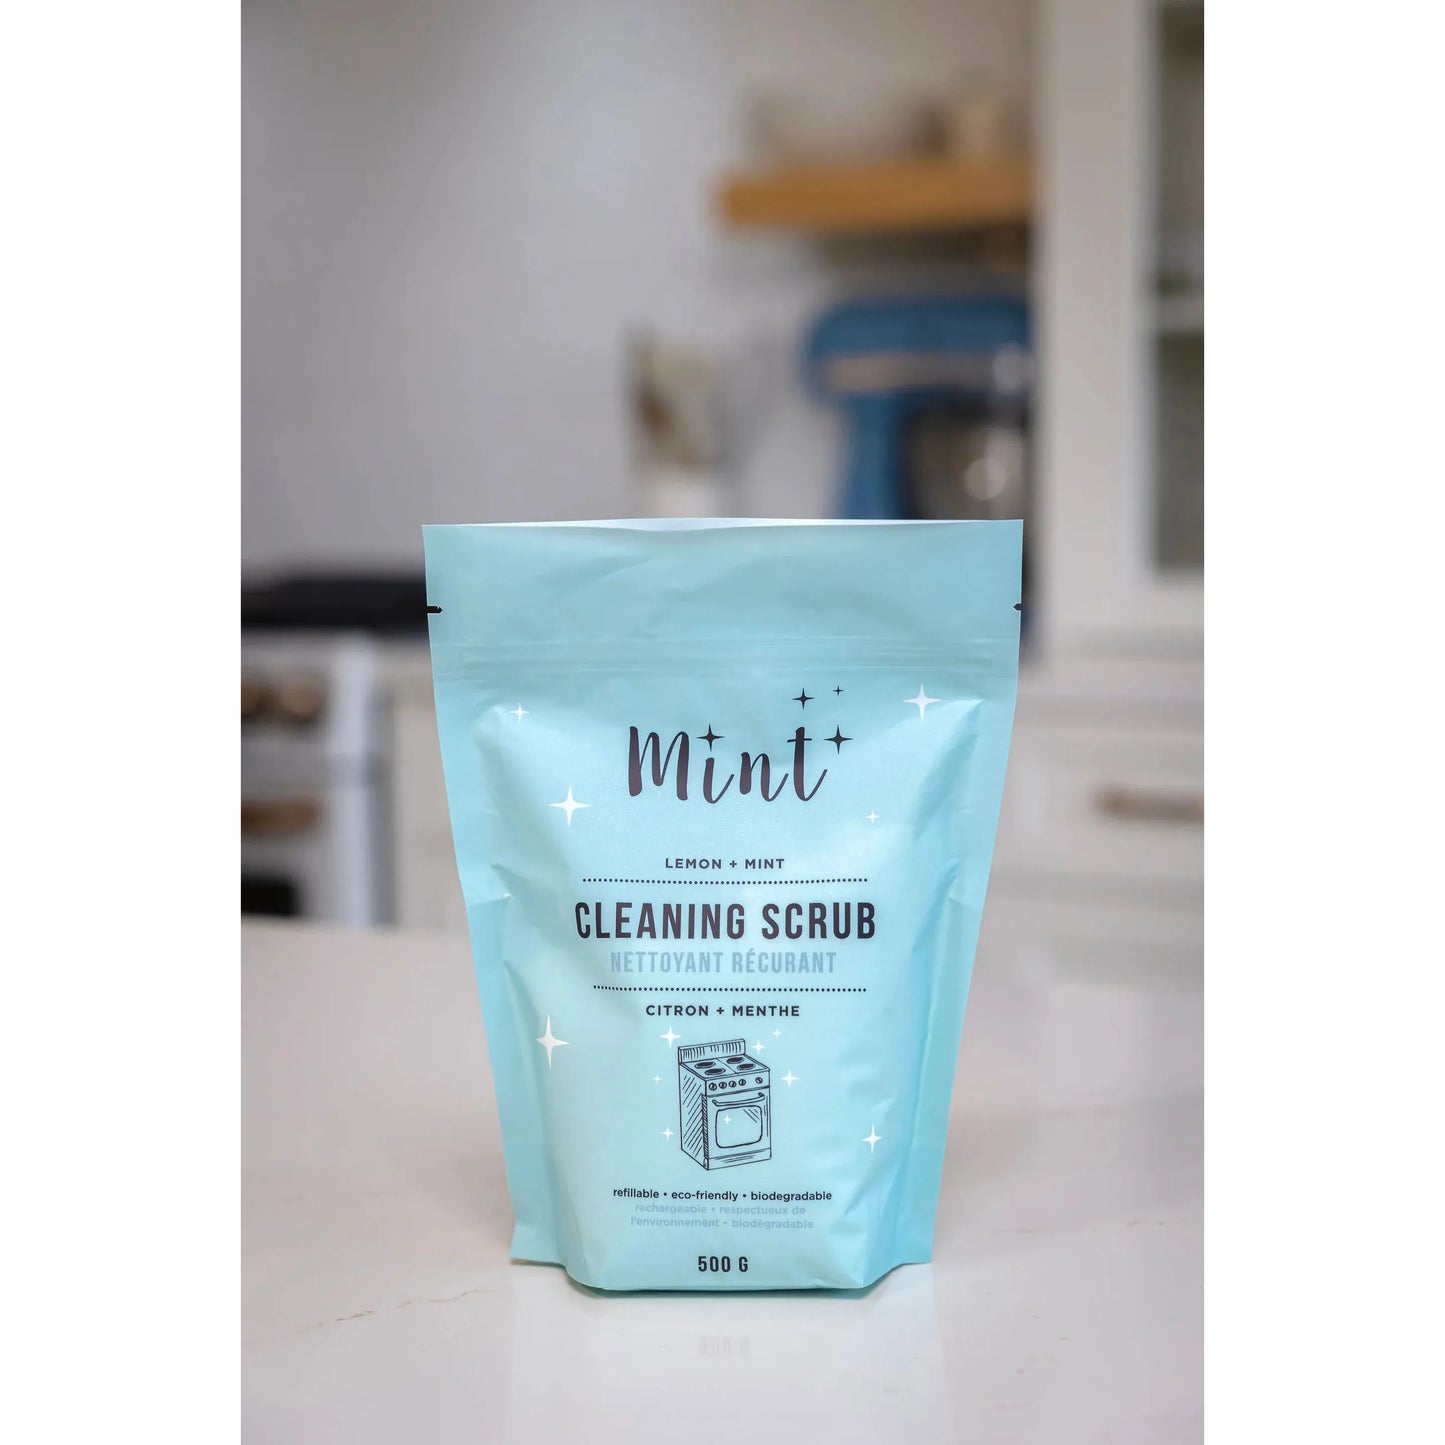 Mint Cleaning Scrub, 500g bag- Refillable